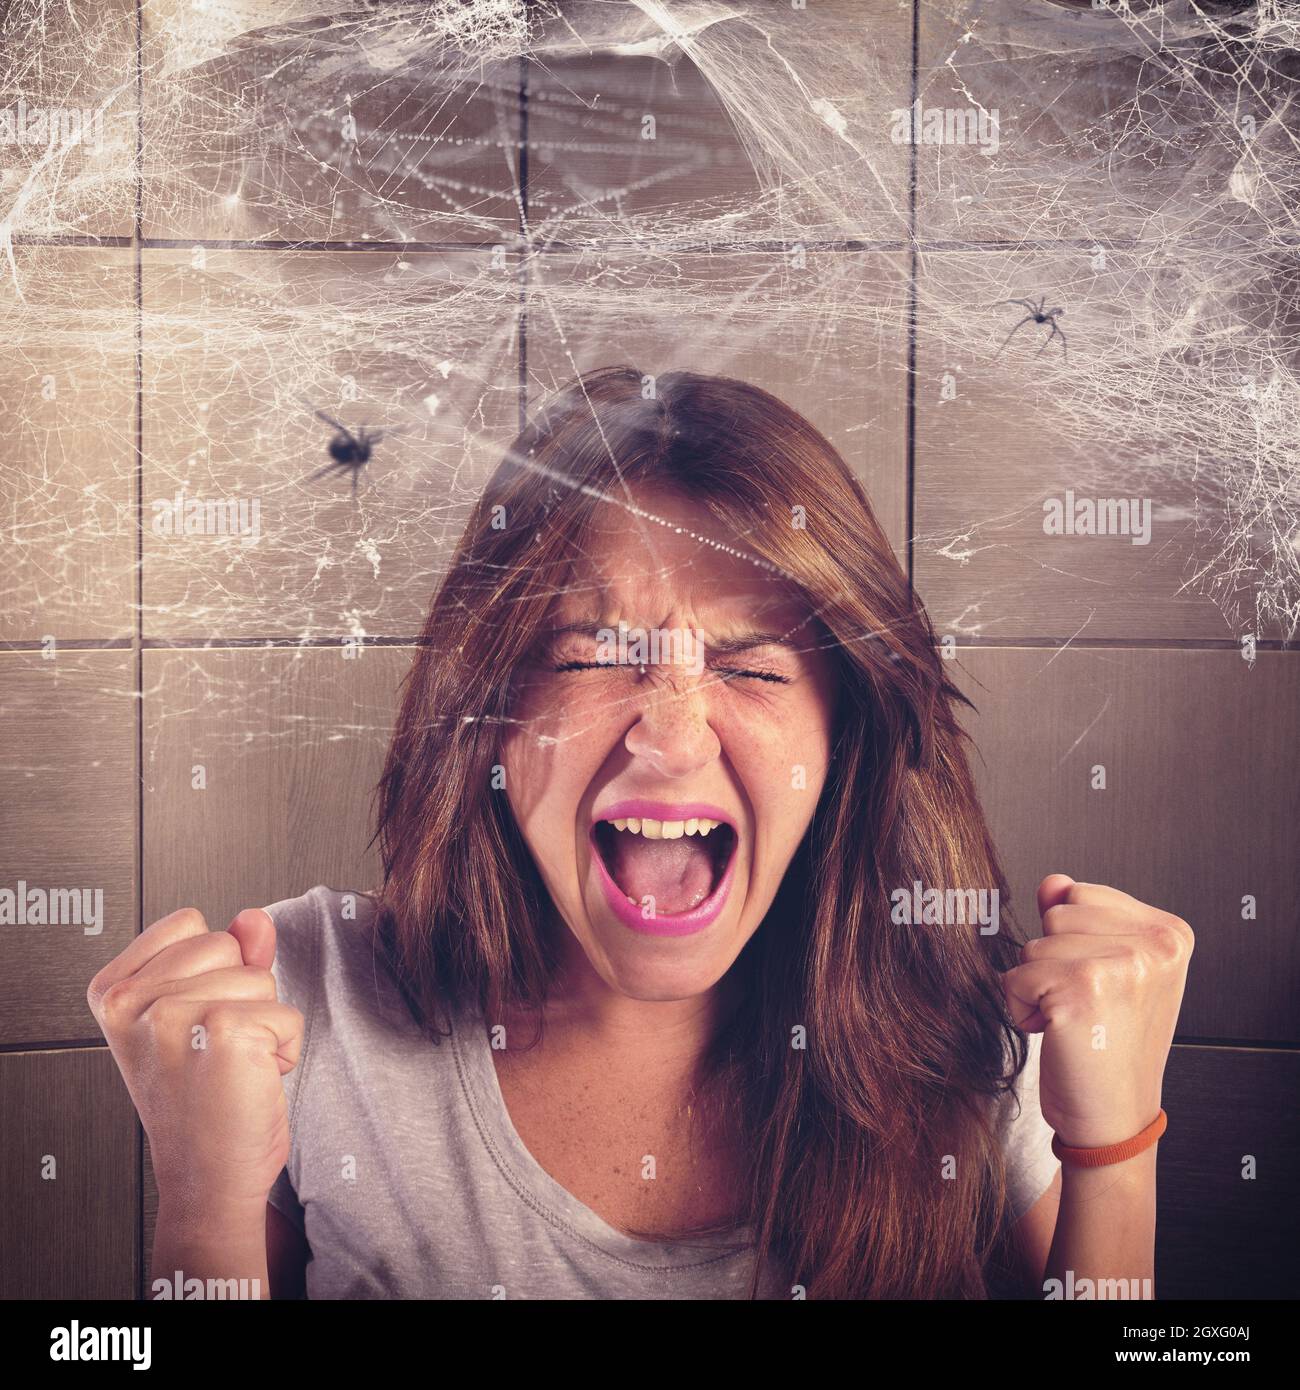 Girl screaming trapped in a spider web Stock Photo